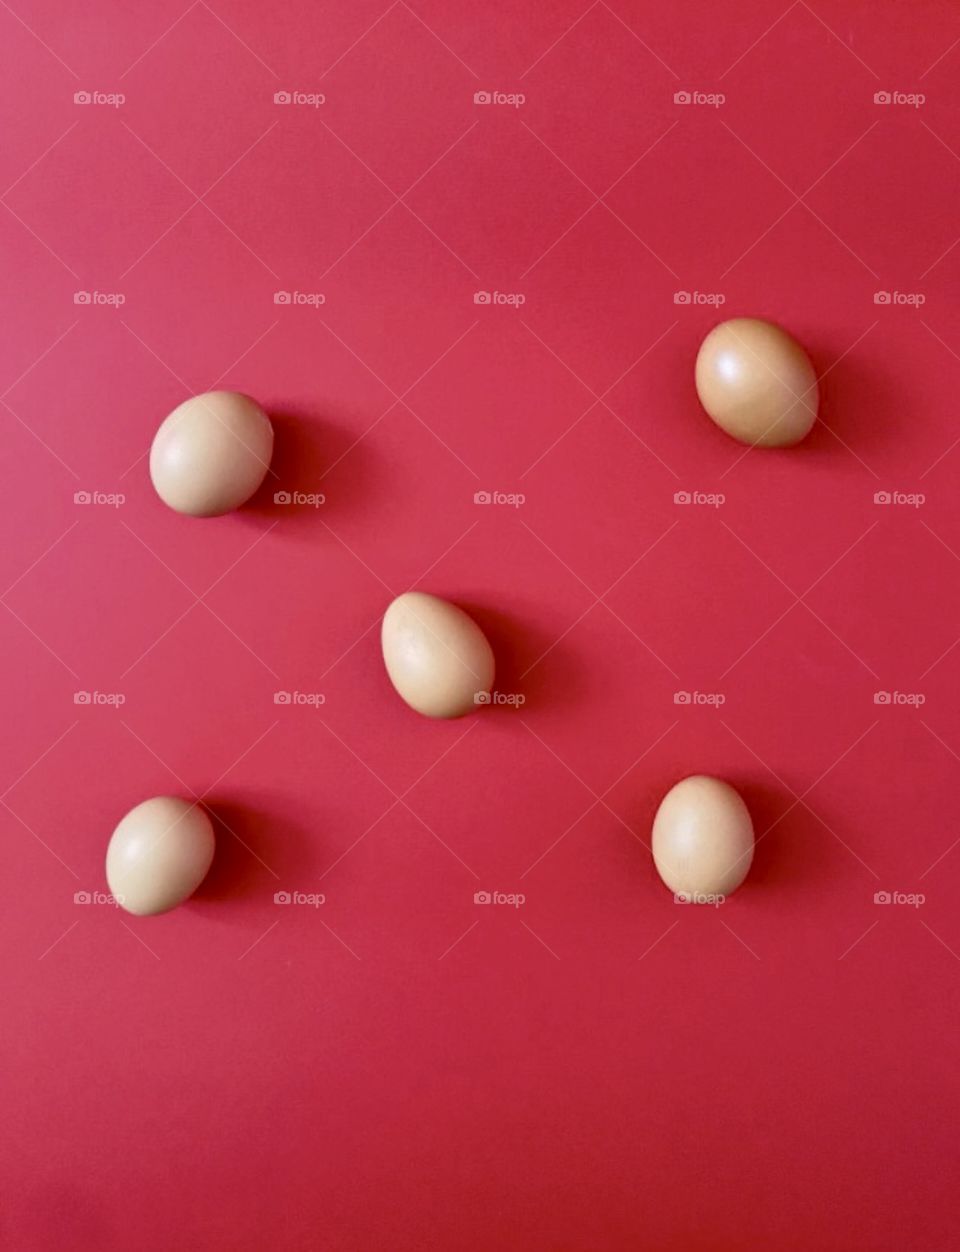 Eggs on a red background.